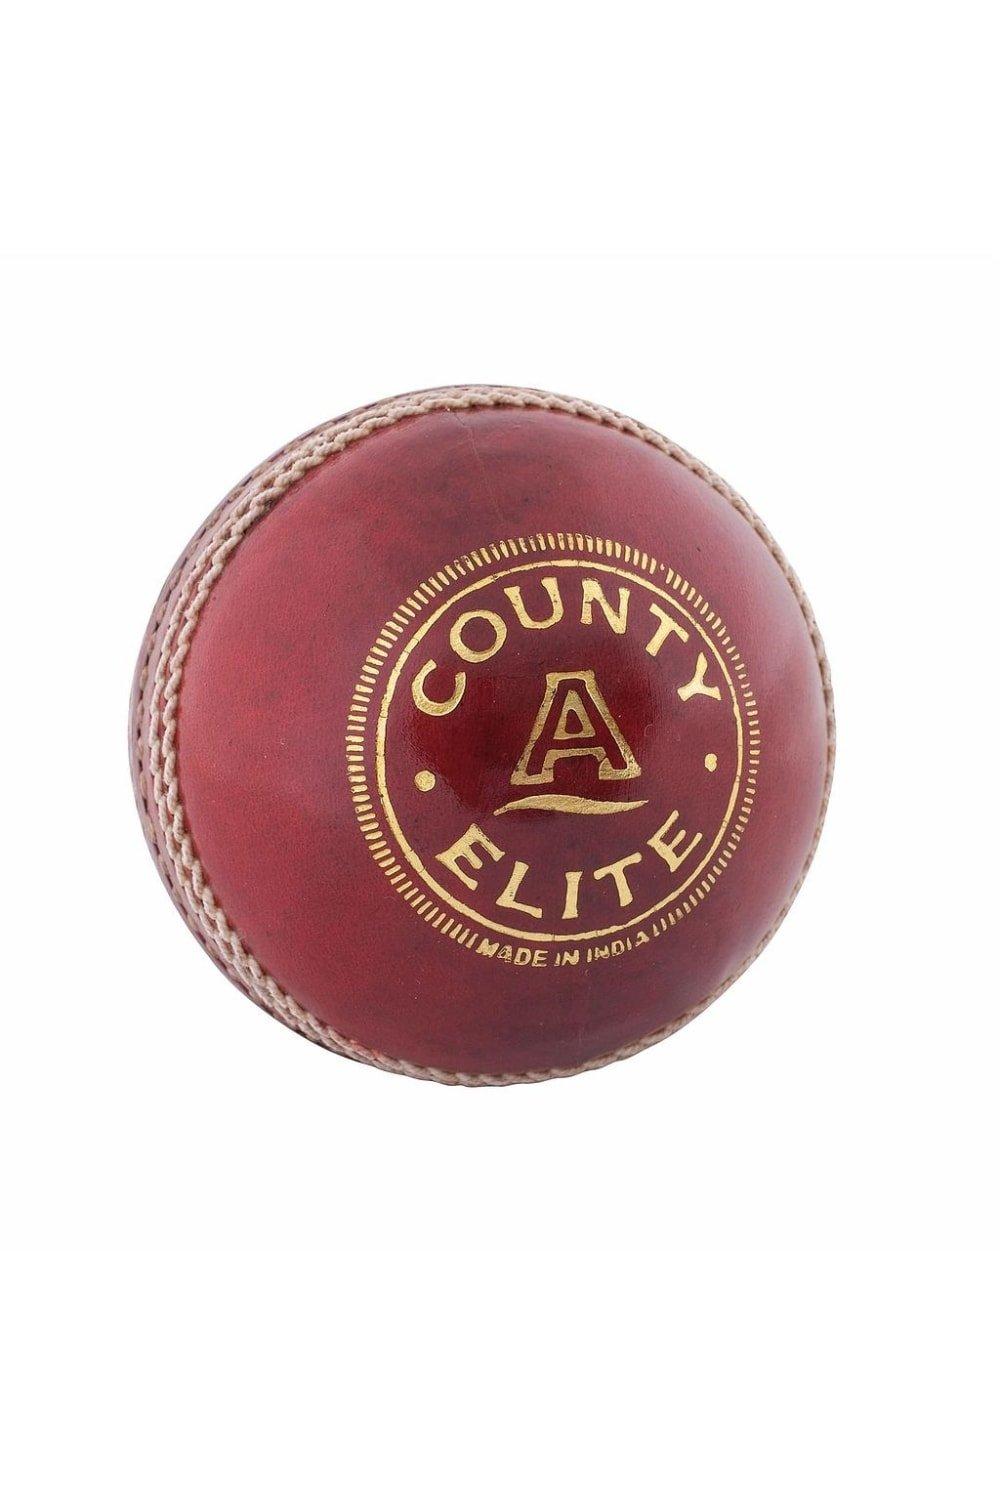 County Elite A Leather Cricket Ball